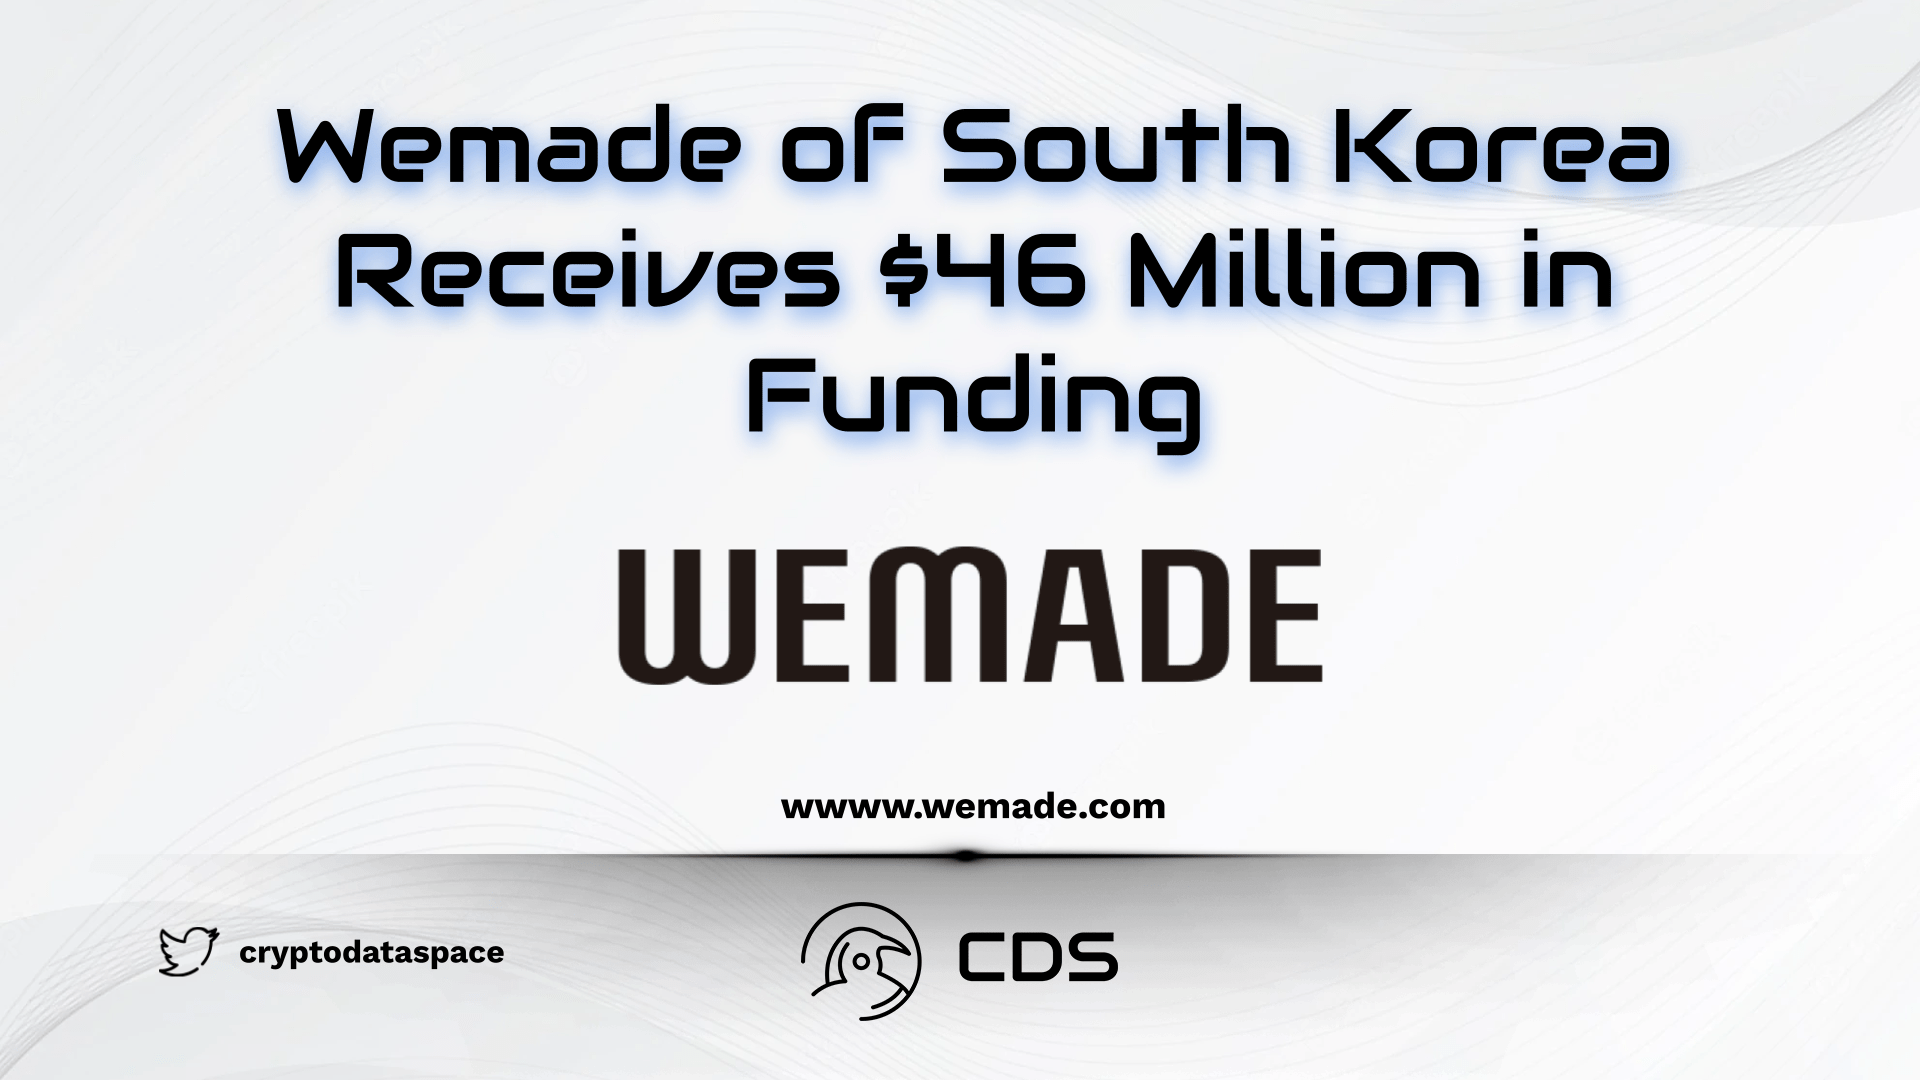 Wemade of South Korea Receives $46 Million in Funding